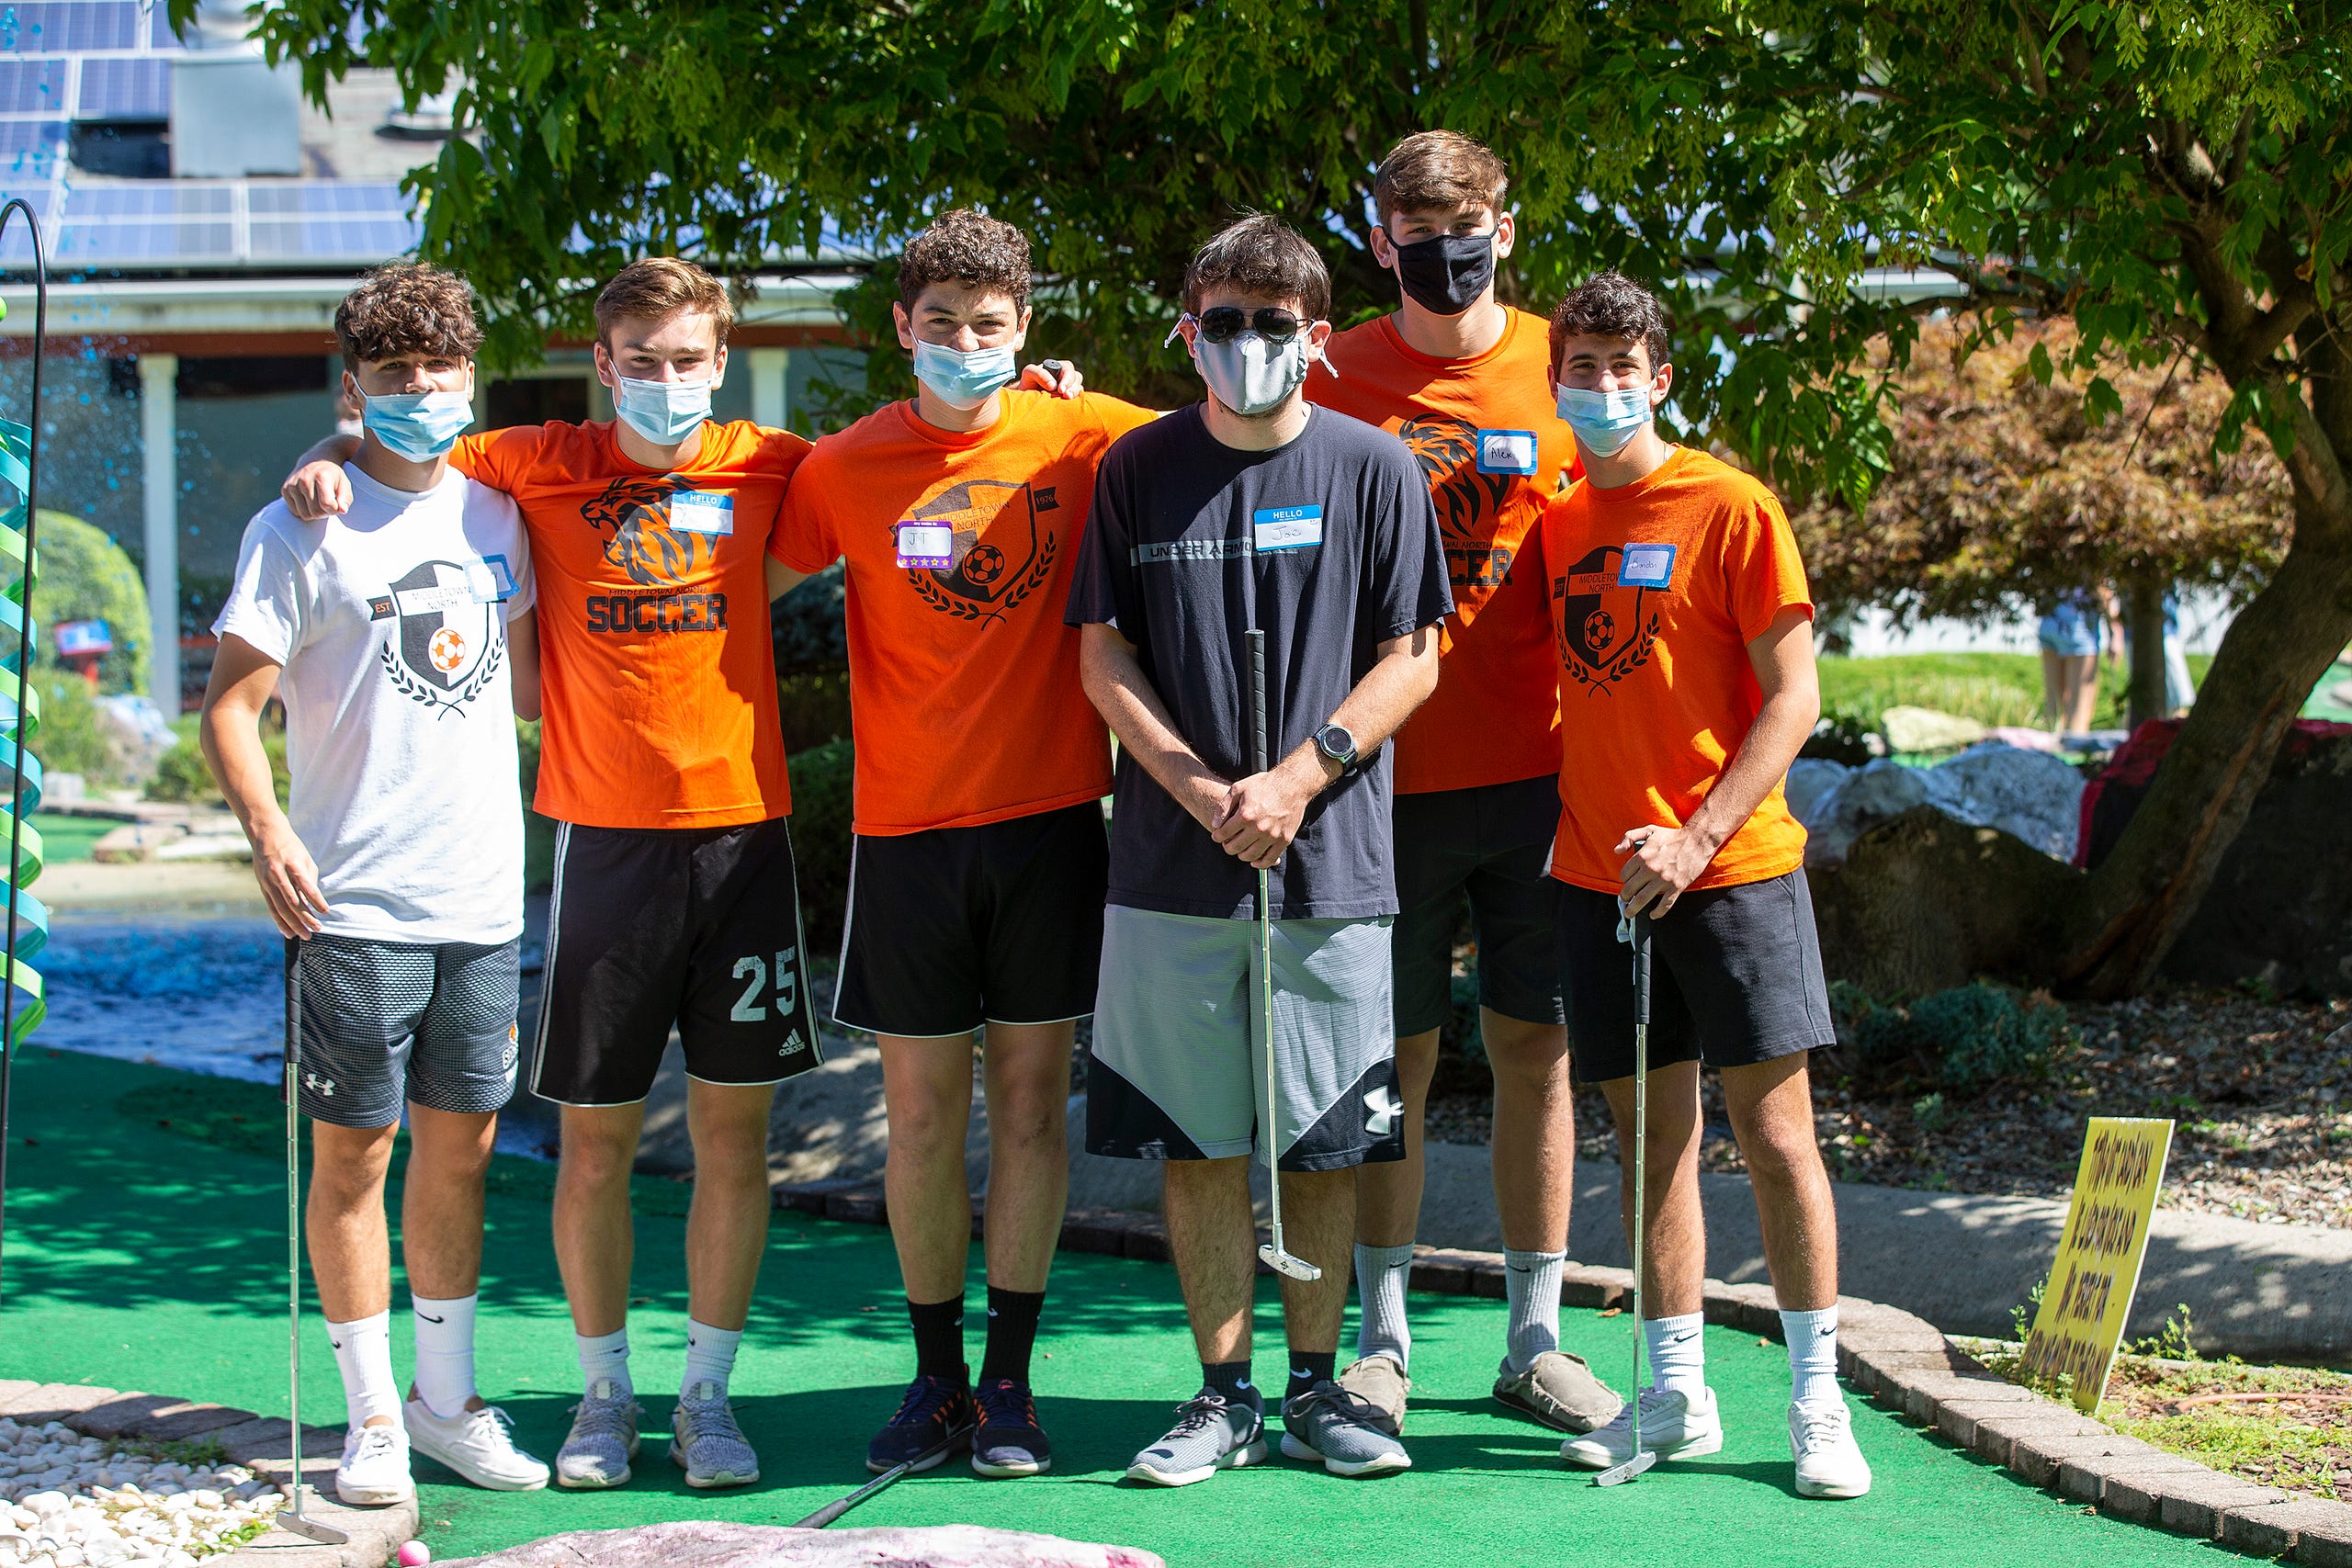 (back row) Members of the Middletown North boys varsity soccer team, Joey Vallillo, 17, Aidan Cardella, 17, JT Meredith, 17, Alex Bogues, 17and Brandon Del Grosso play mini-golf with (center) Joe Owens, 20 of Hazlet as part of Friends Connect Foundation, a nonprofit run by Sophia Ziajski, 19, of Middletown, at TST BBQ & Mini Golf in Middletown, NJ Tuesday, August 18, 2020.